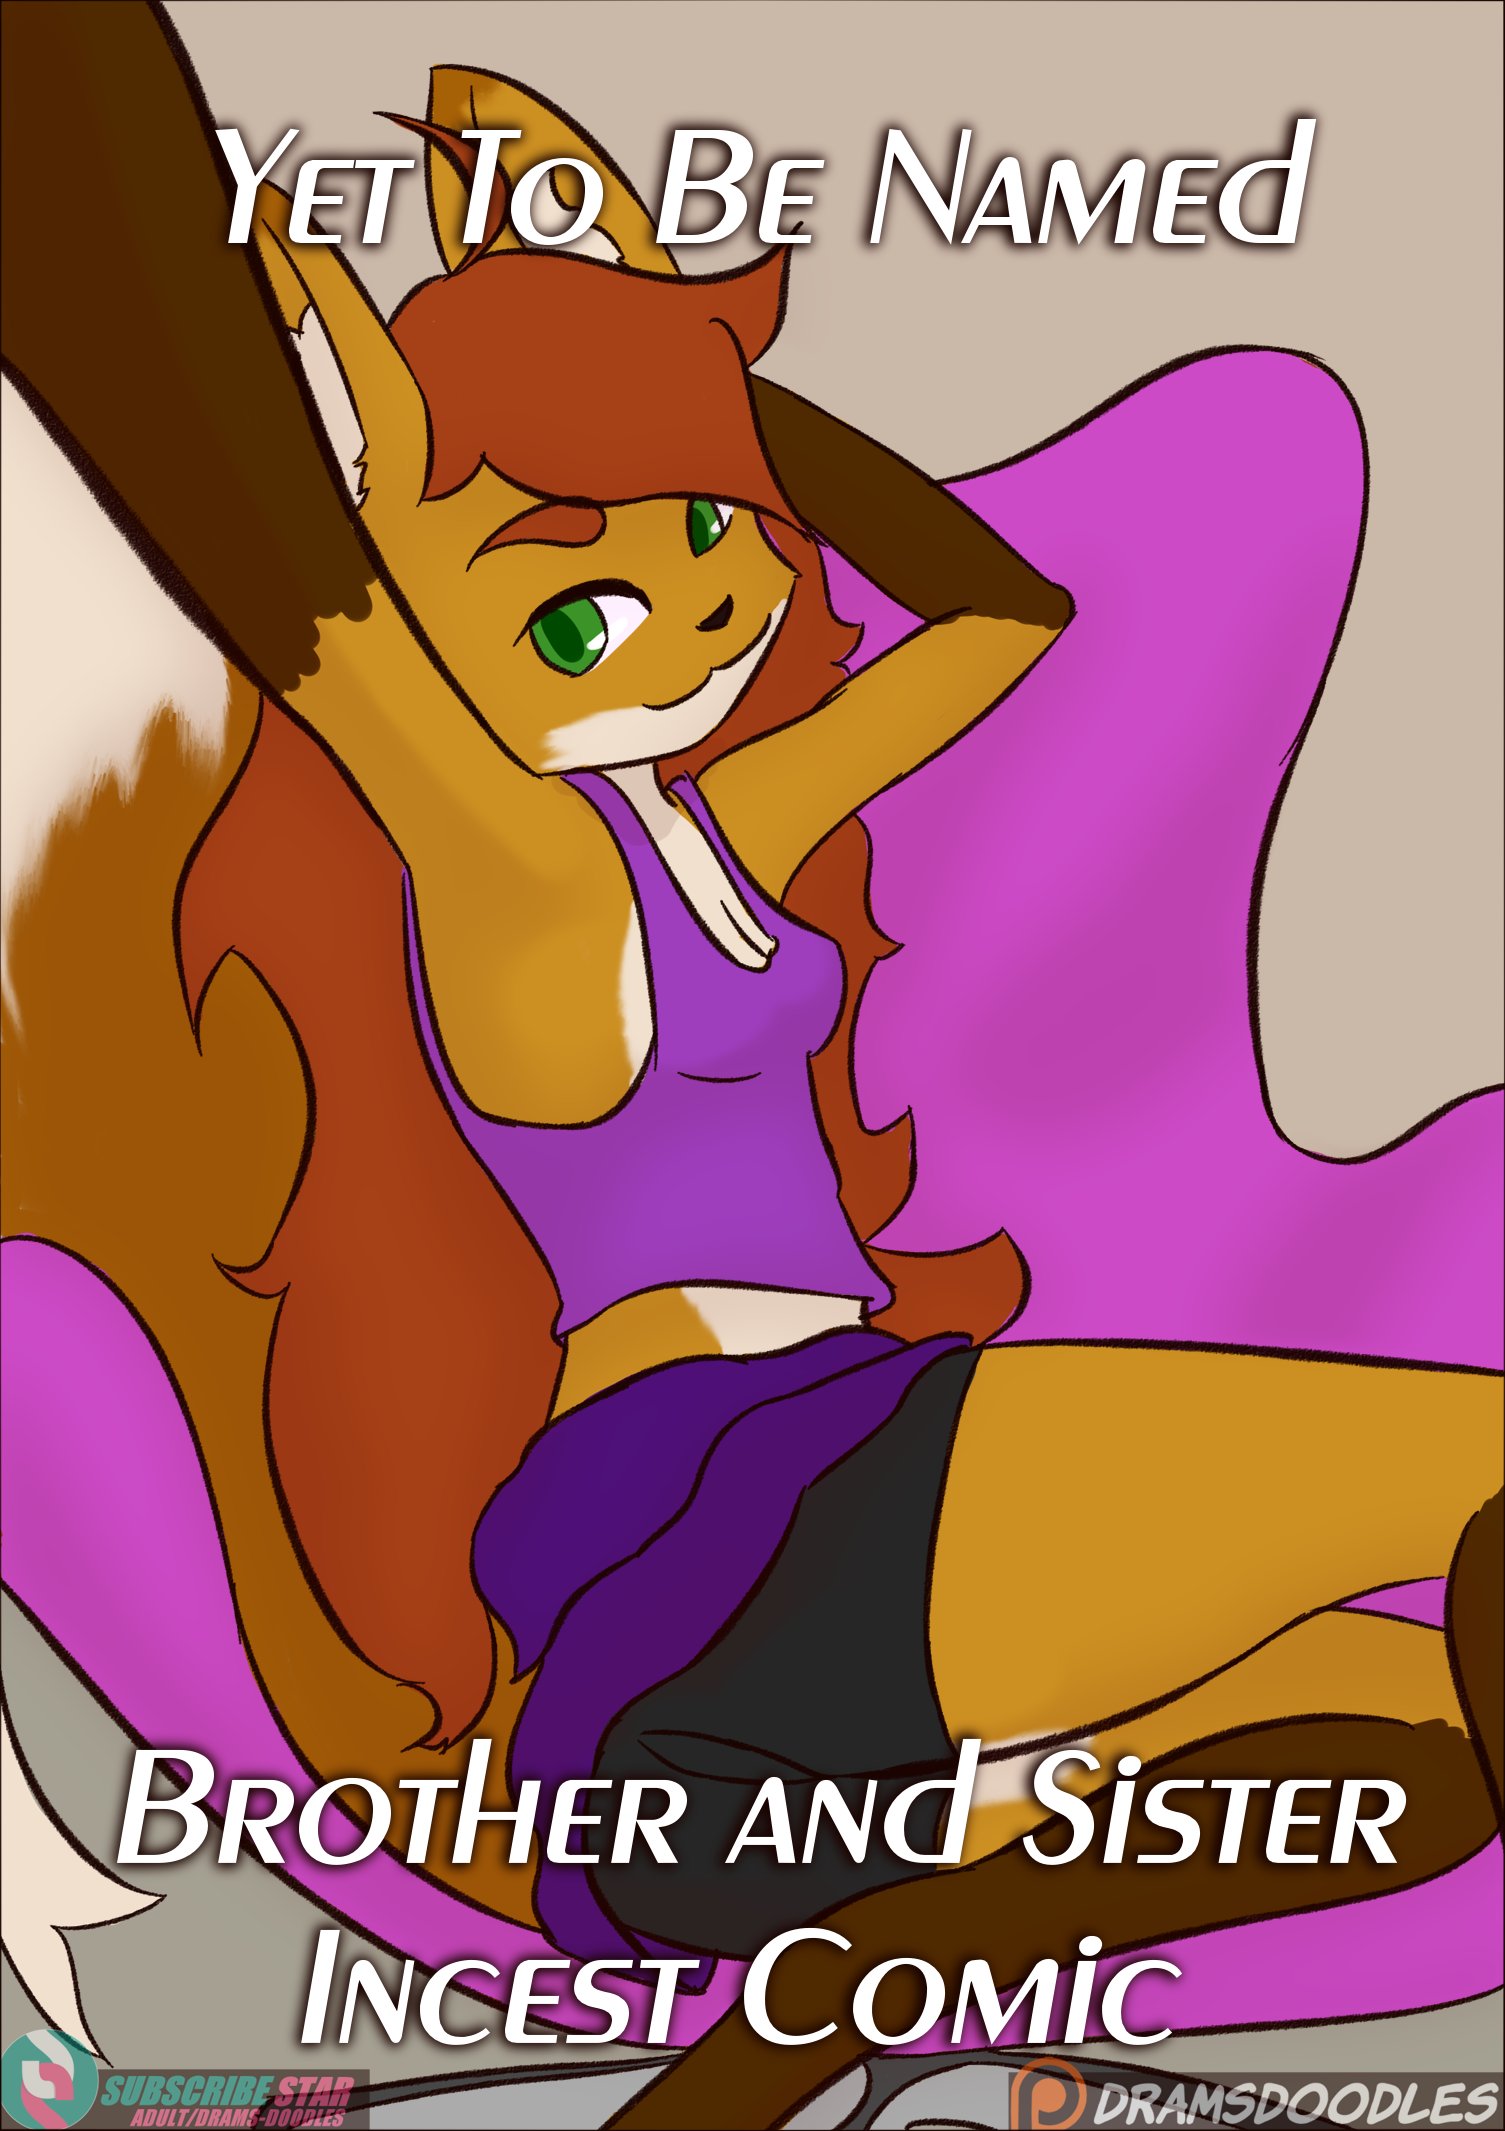 Brother Sister Cartoon Porno - Anime Brother And Sister Sex Comics | Sex Pictures Pass